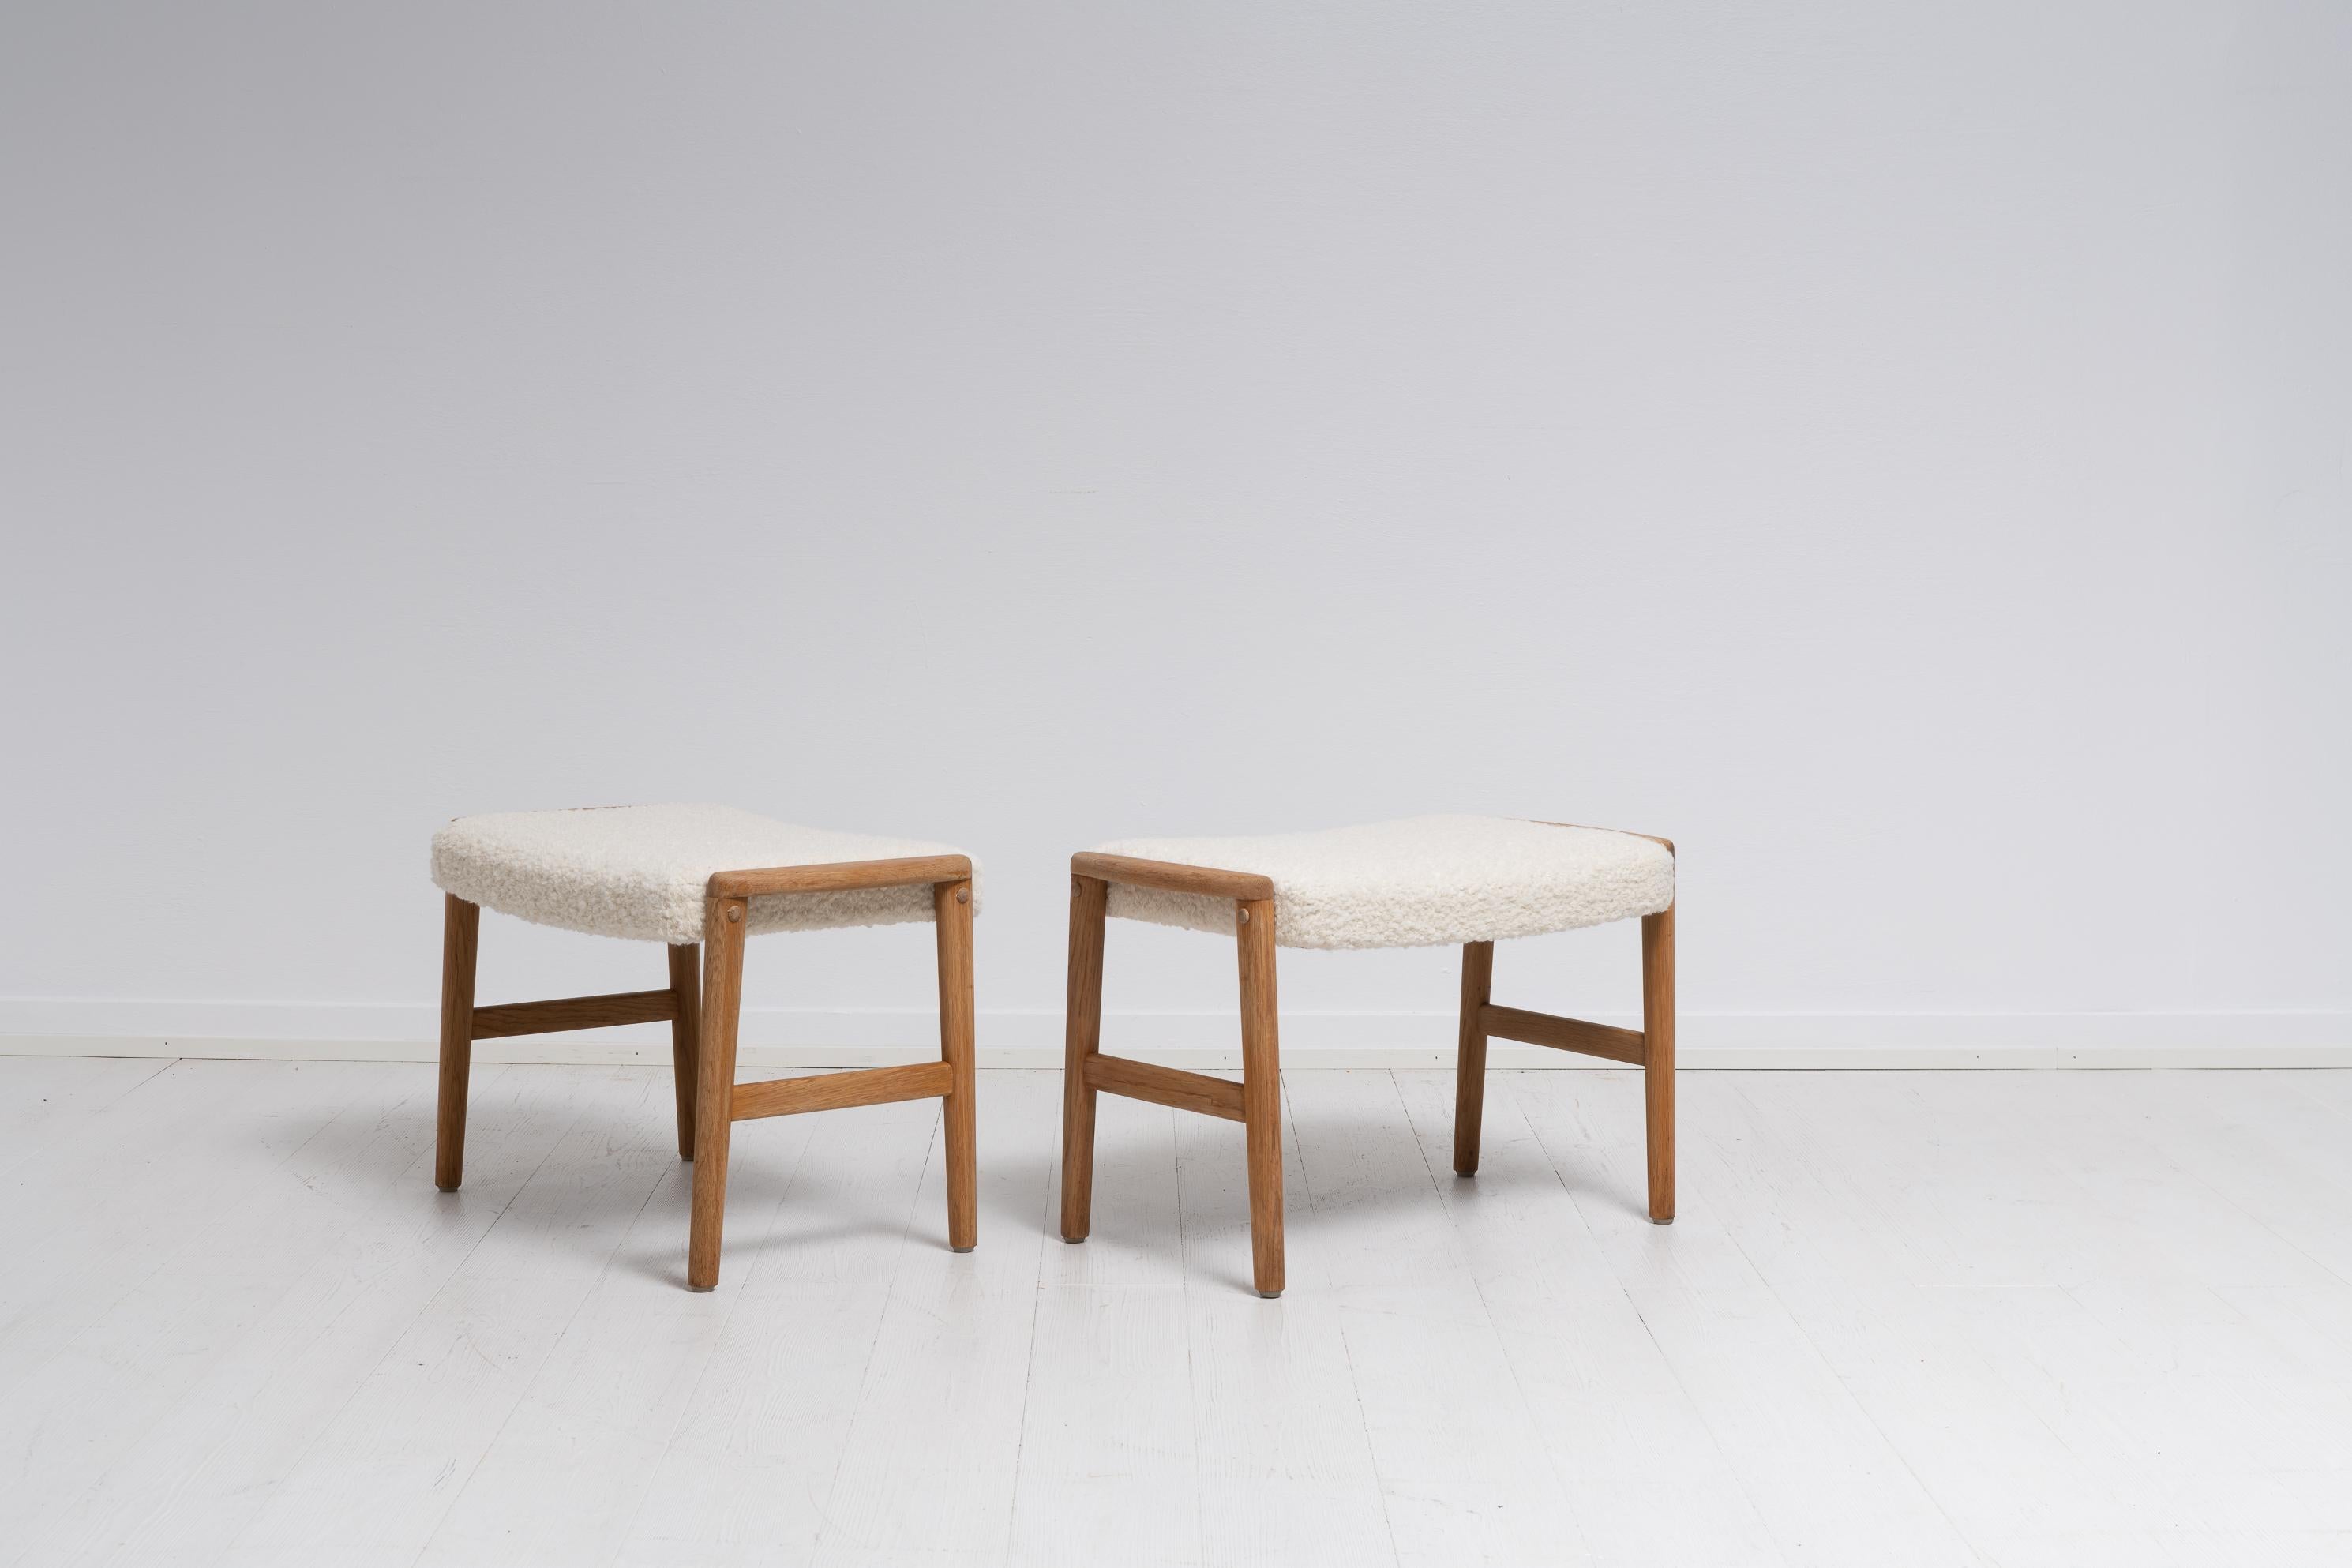 Scandinavian modern footstools in oak from Sweden made around the 1960s. The stools are oak and newly upholstered. The cushions are upholstered with a special kind of white bouclé fabric called Makalu from Finnish Lauritzon’s. Small and convenient